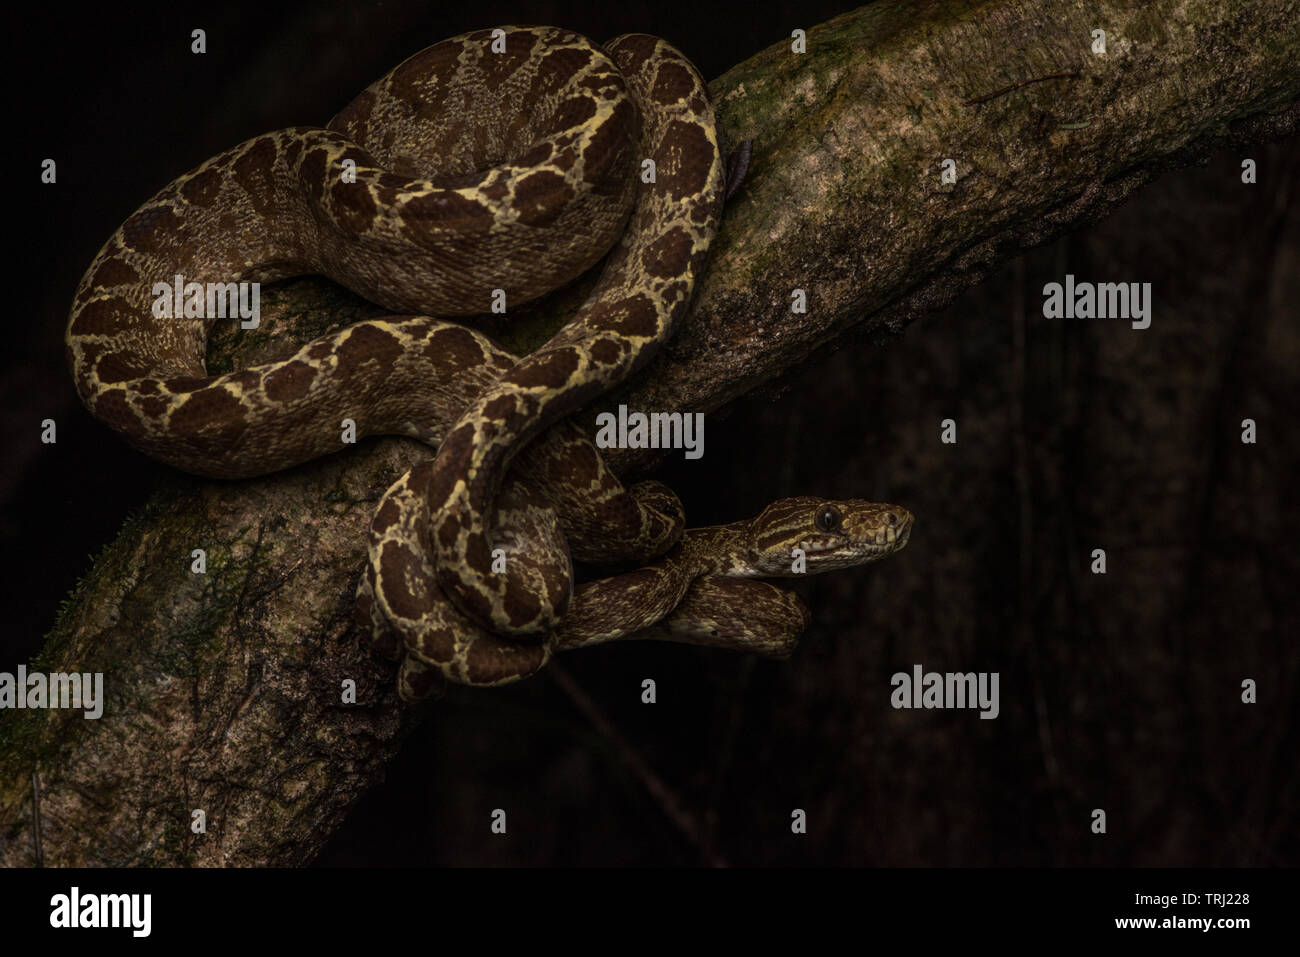 An amazon tree boa (Corallus hortulanus) from Yasuni national park in Ecuador, these snakes spend nearly all their time high in the forest canopy. Stock Photo